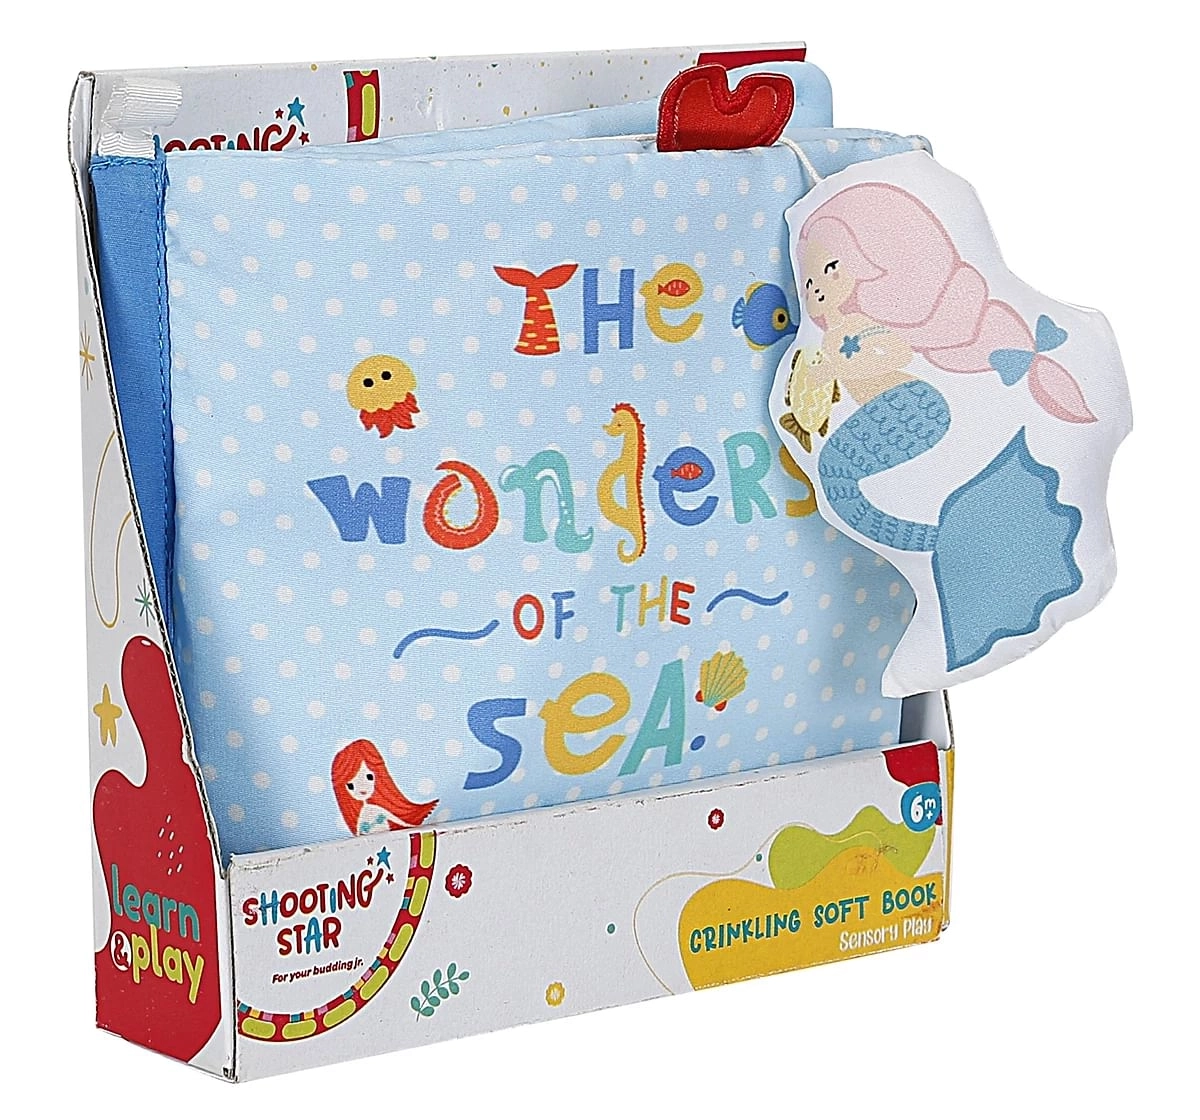 Shooting Star Sea Soft Book Rattle for kids 3Y+, Multicolour